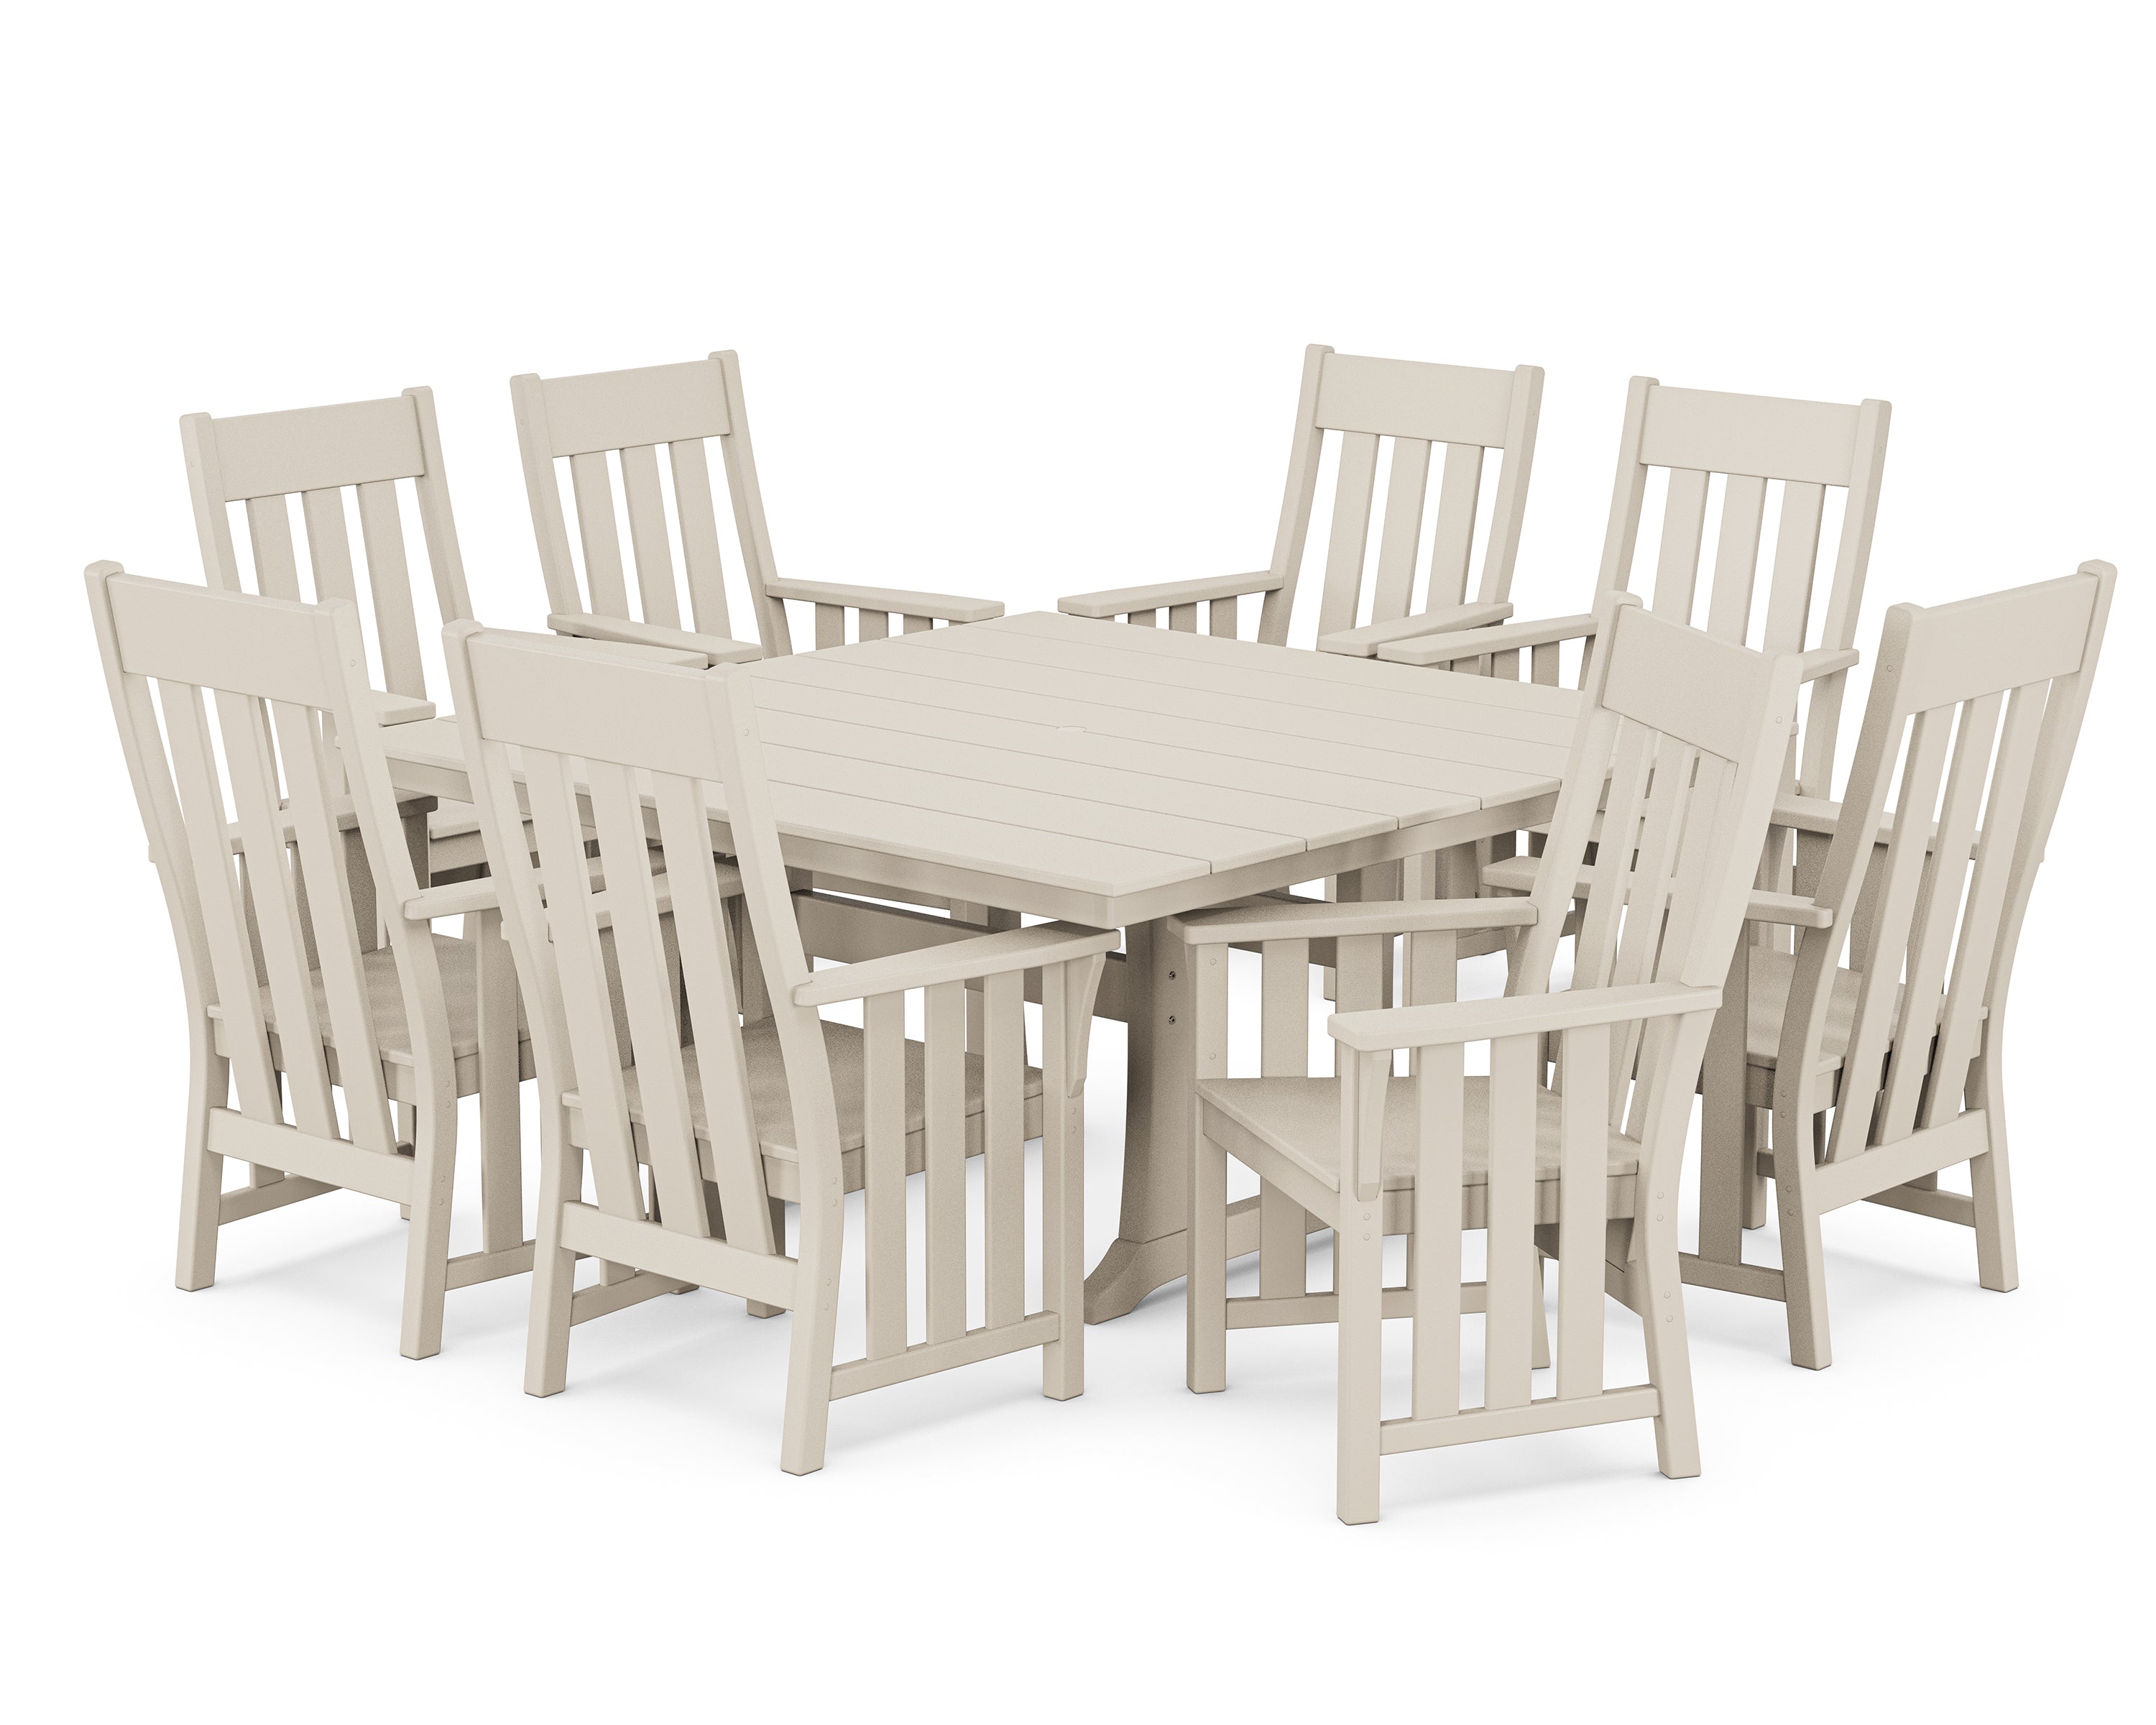 Martha Stewart by POLYWOOD® Acadia 9-Piece Square Farmhouse Dining Set with Trestle Legs in Sand